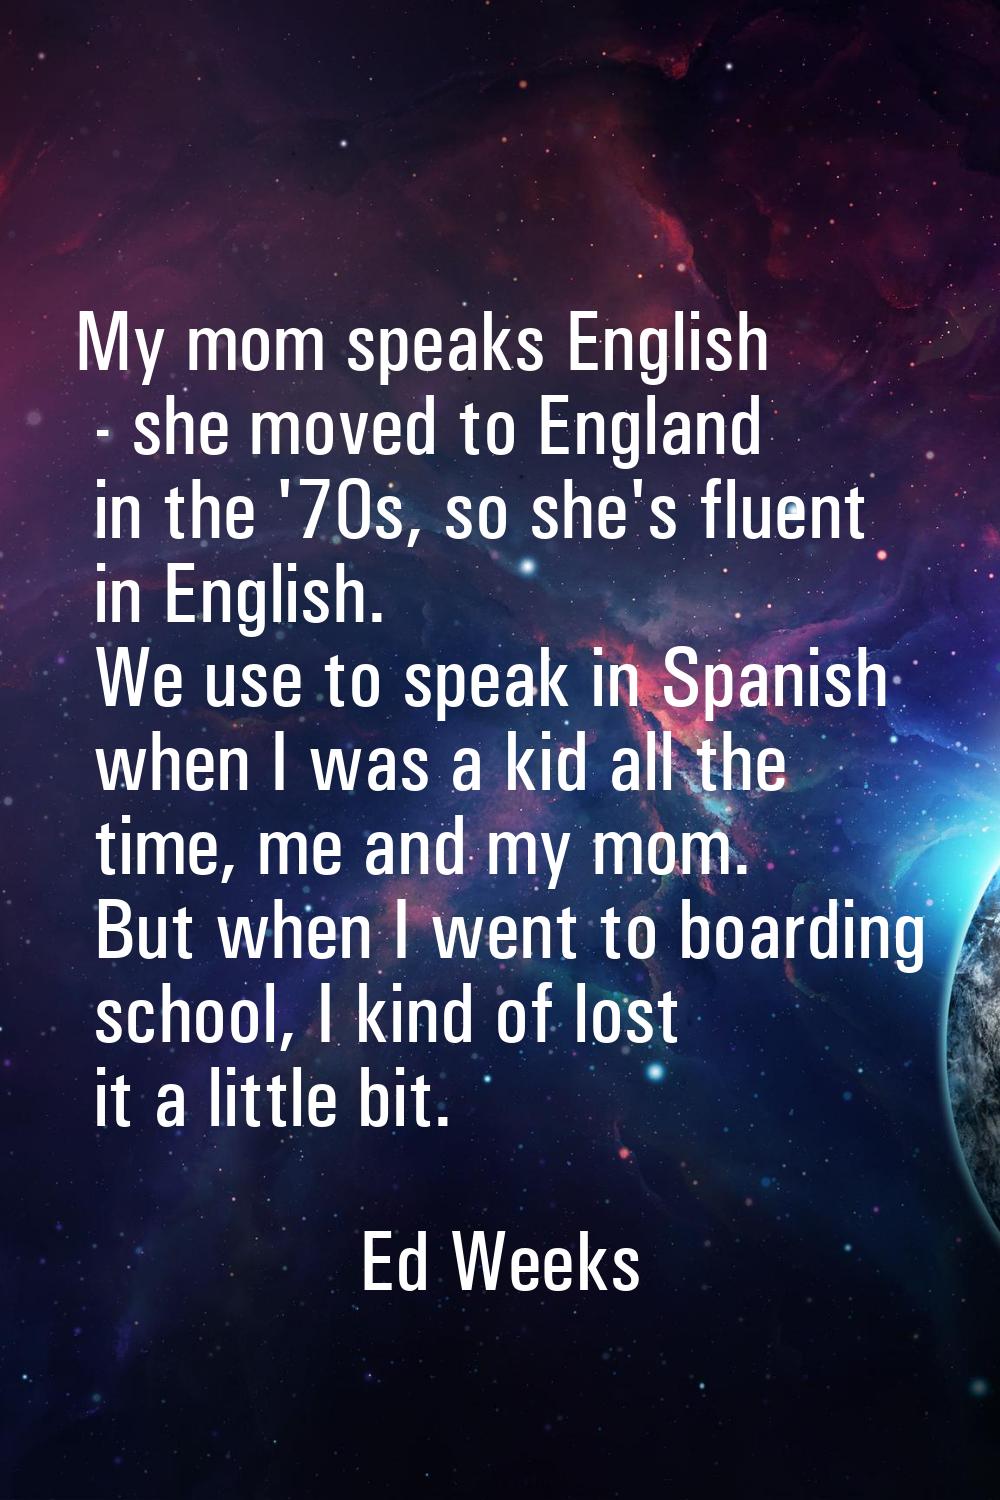 My mom speaks English - she moved to England in the '70s, so she's fluent in English. We use to spe